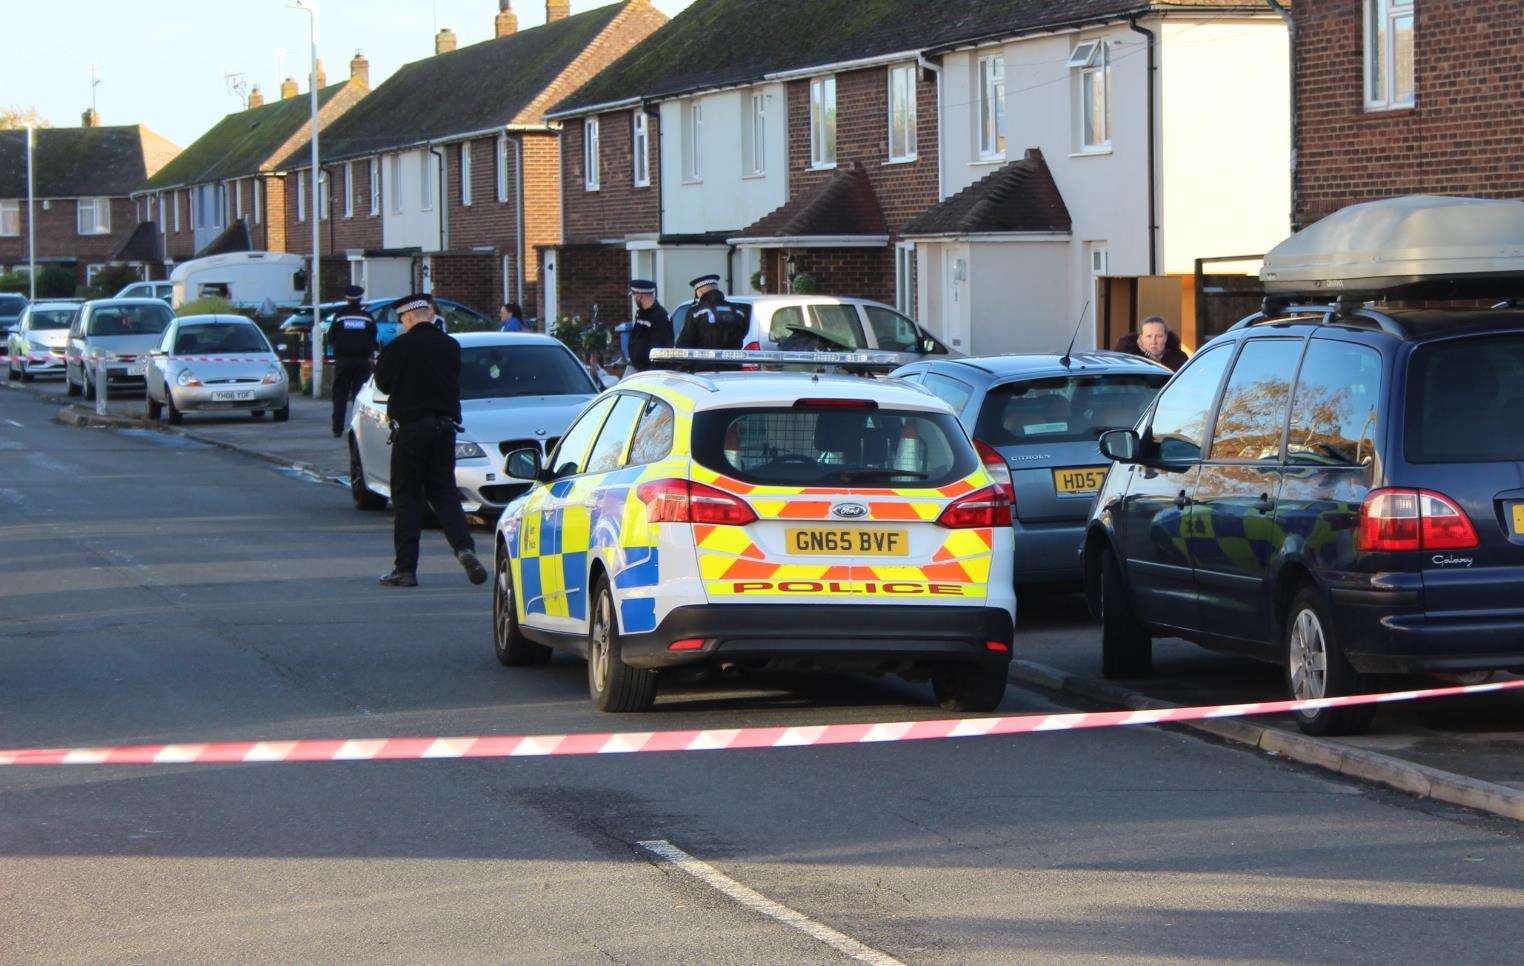 Police taped off Manor Road, Rushenden, after a stabbing on Remembrance Sunday (5500519)